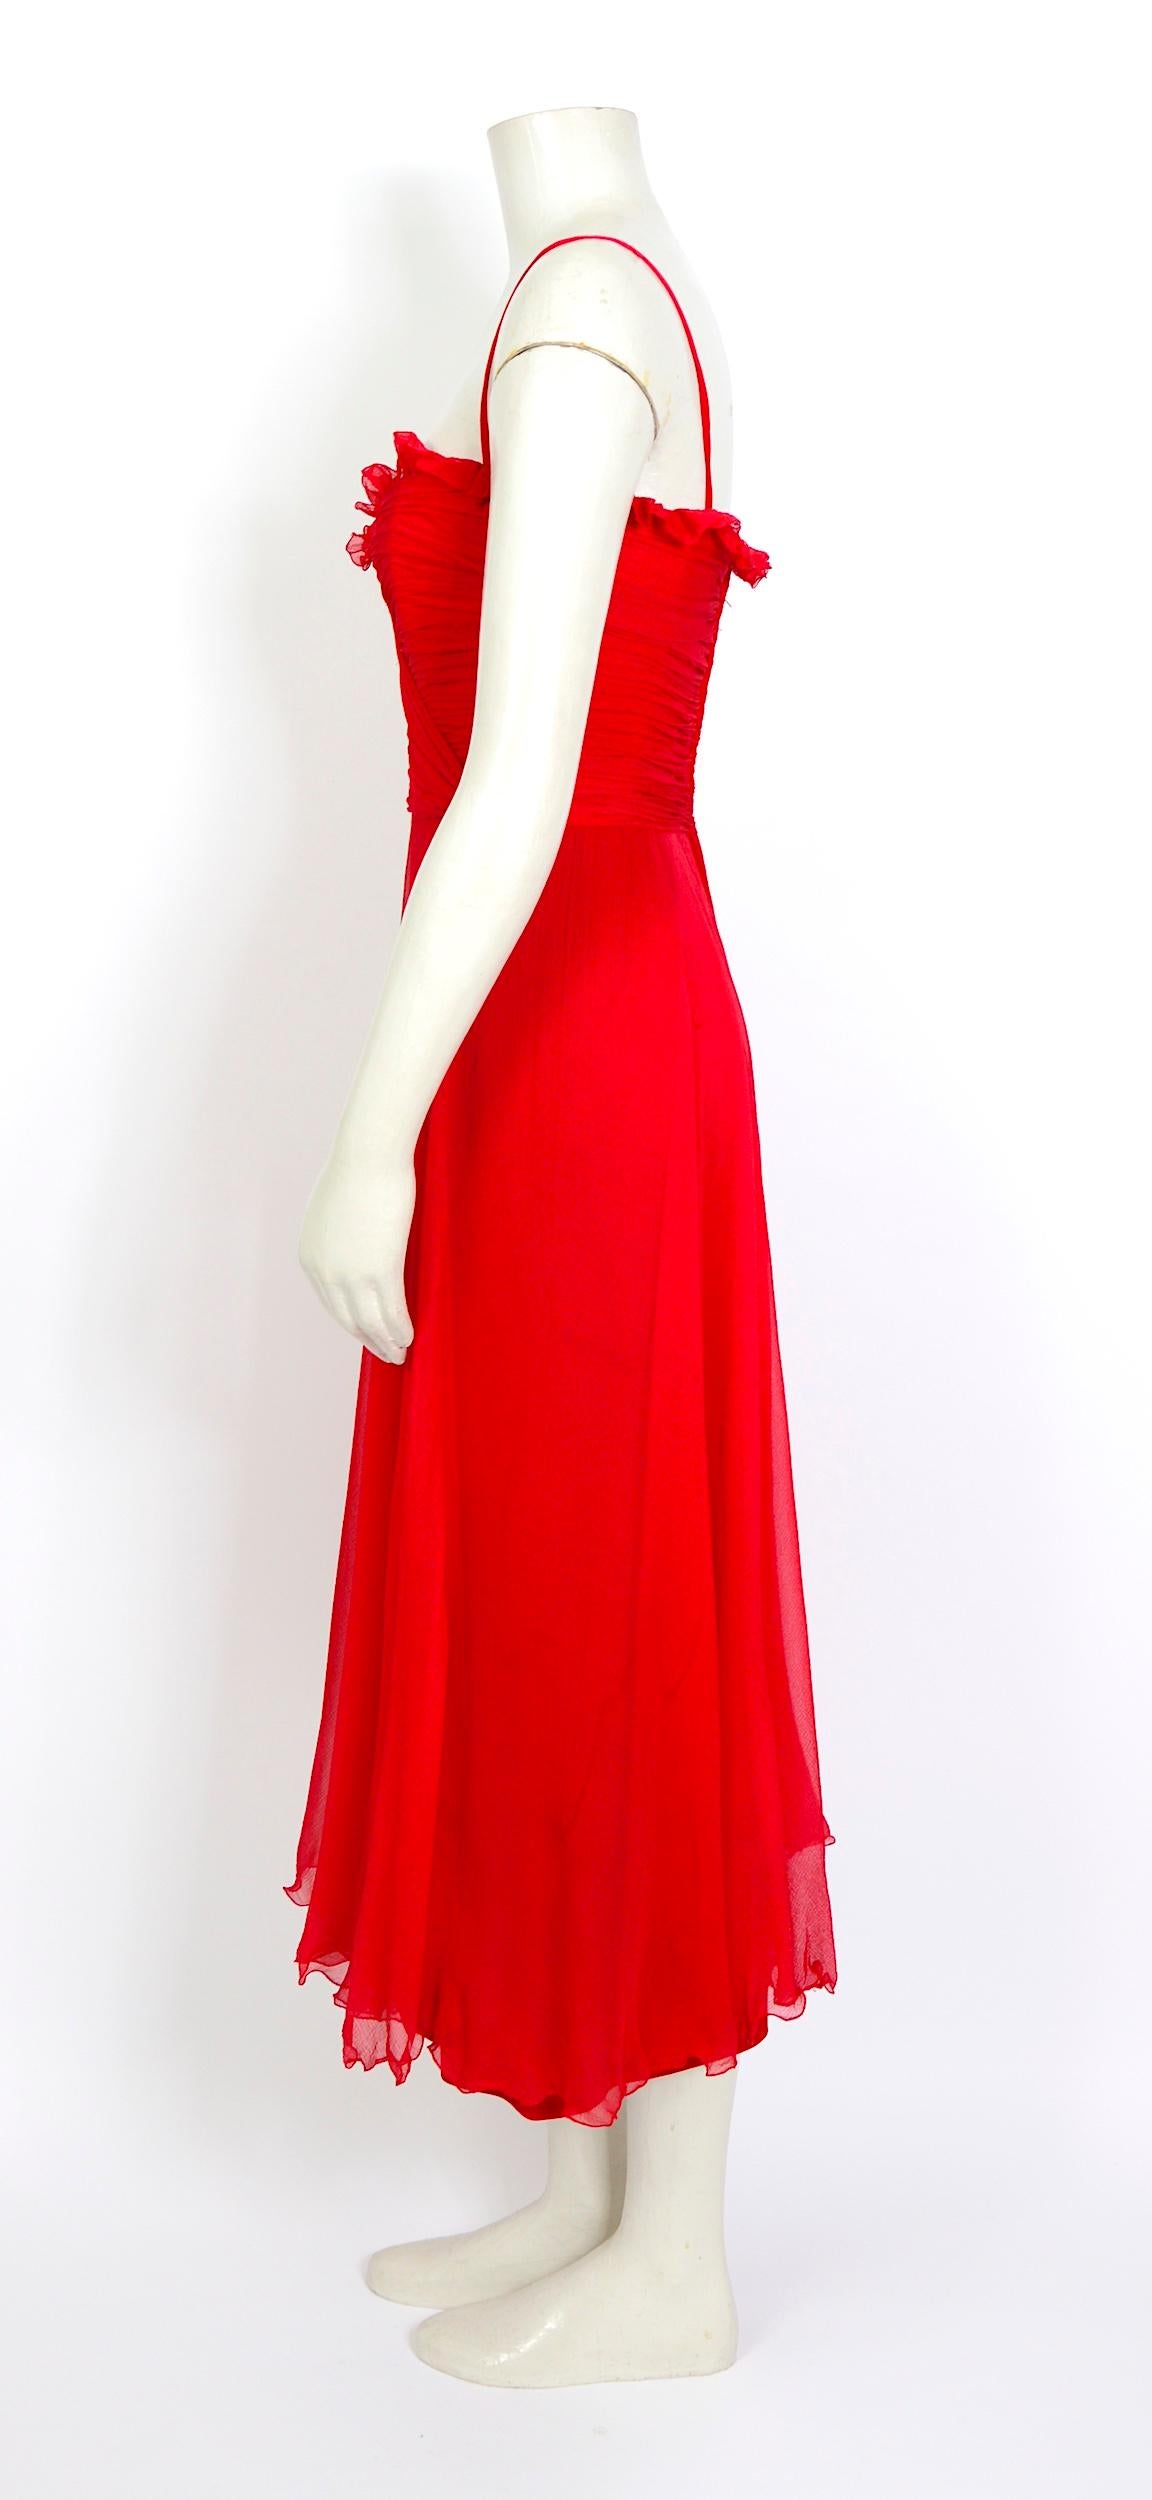 Loris Azzaro 1970s vintage collectors red silk chiffon draped bodice dress In Excellent Condition For Sale In Antwerp, BE